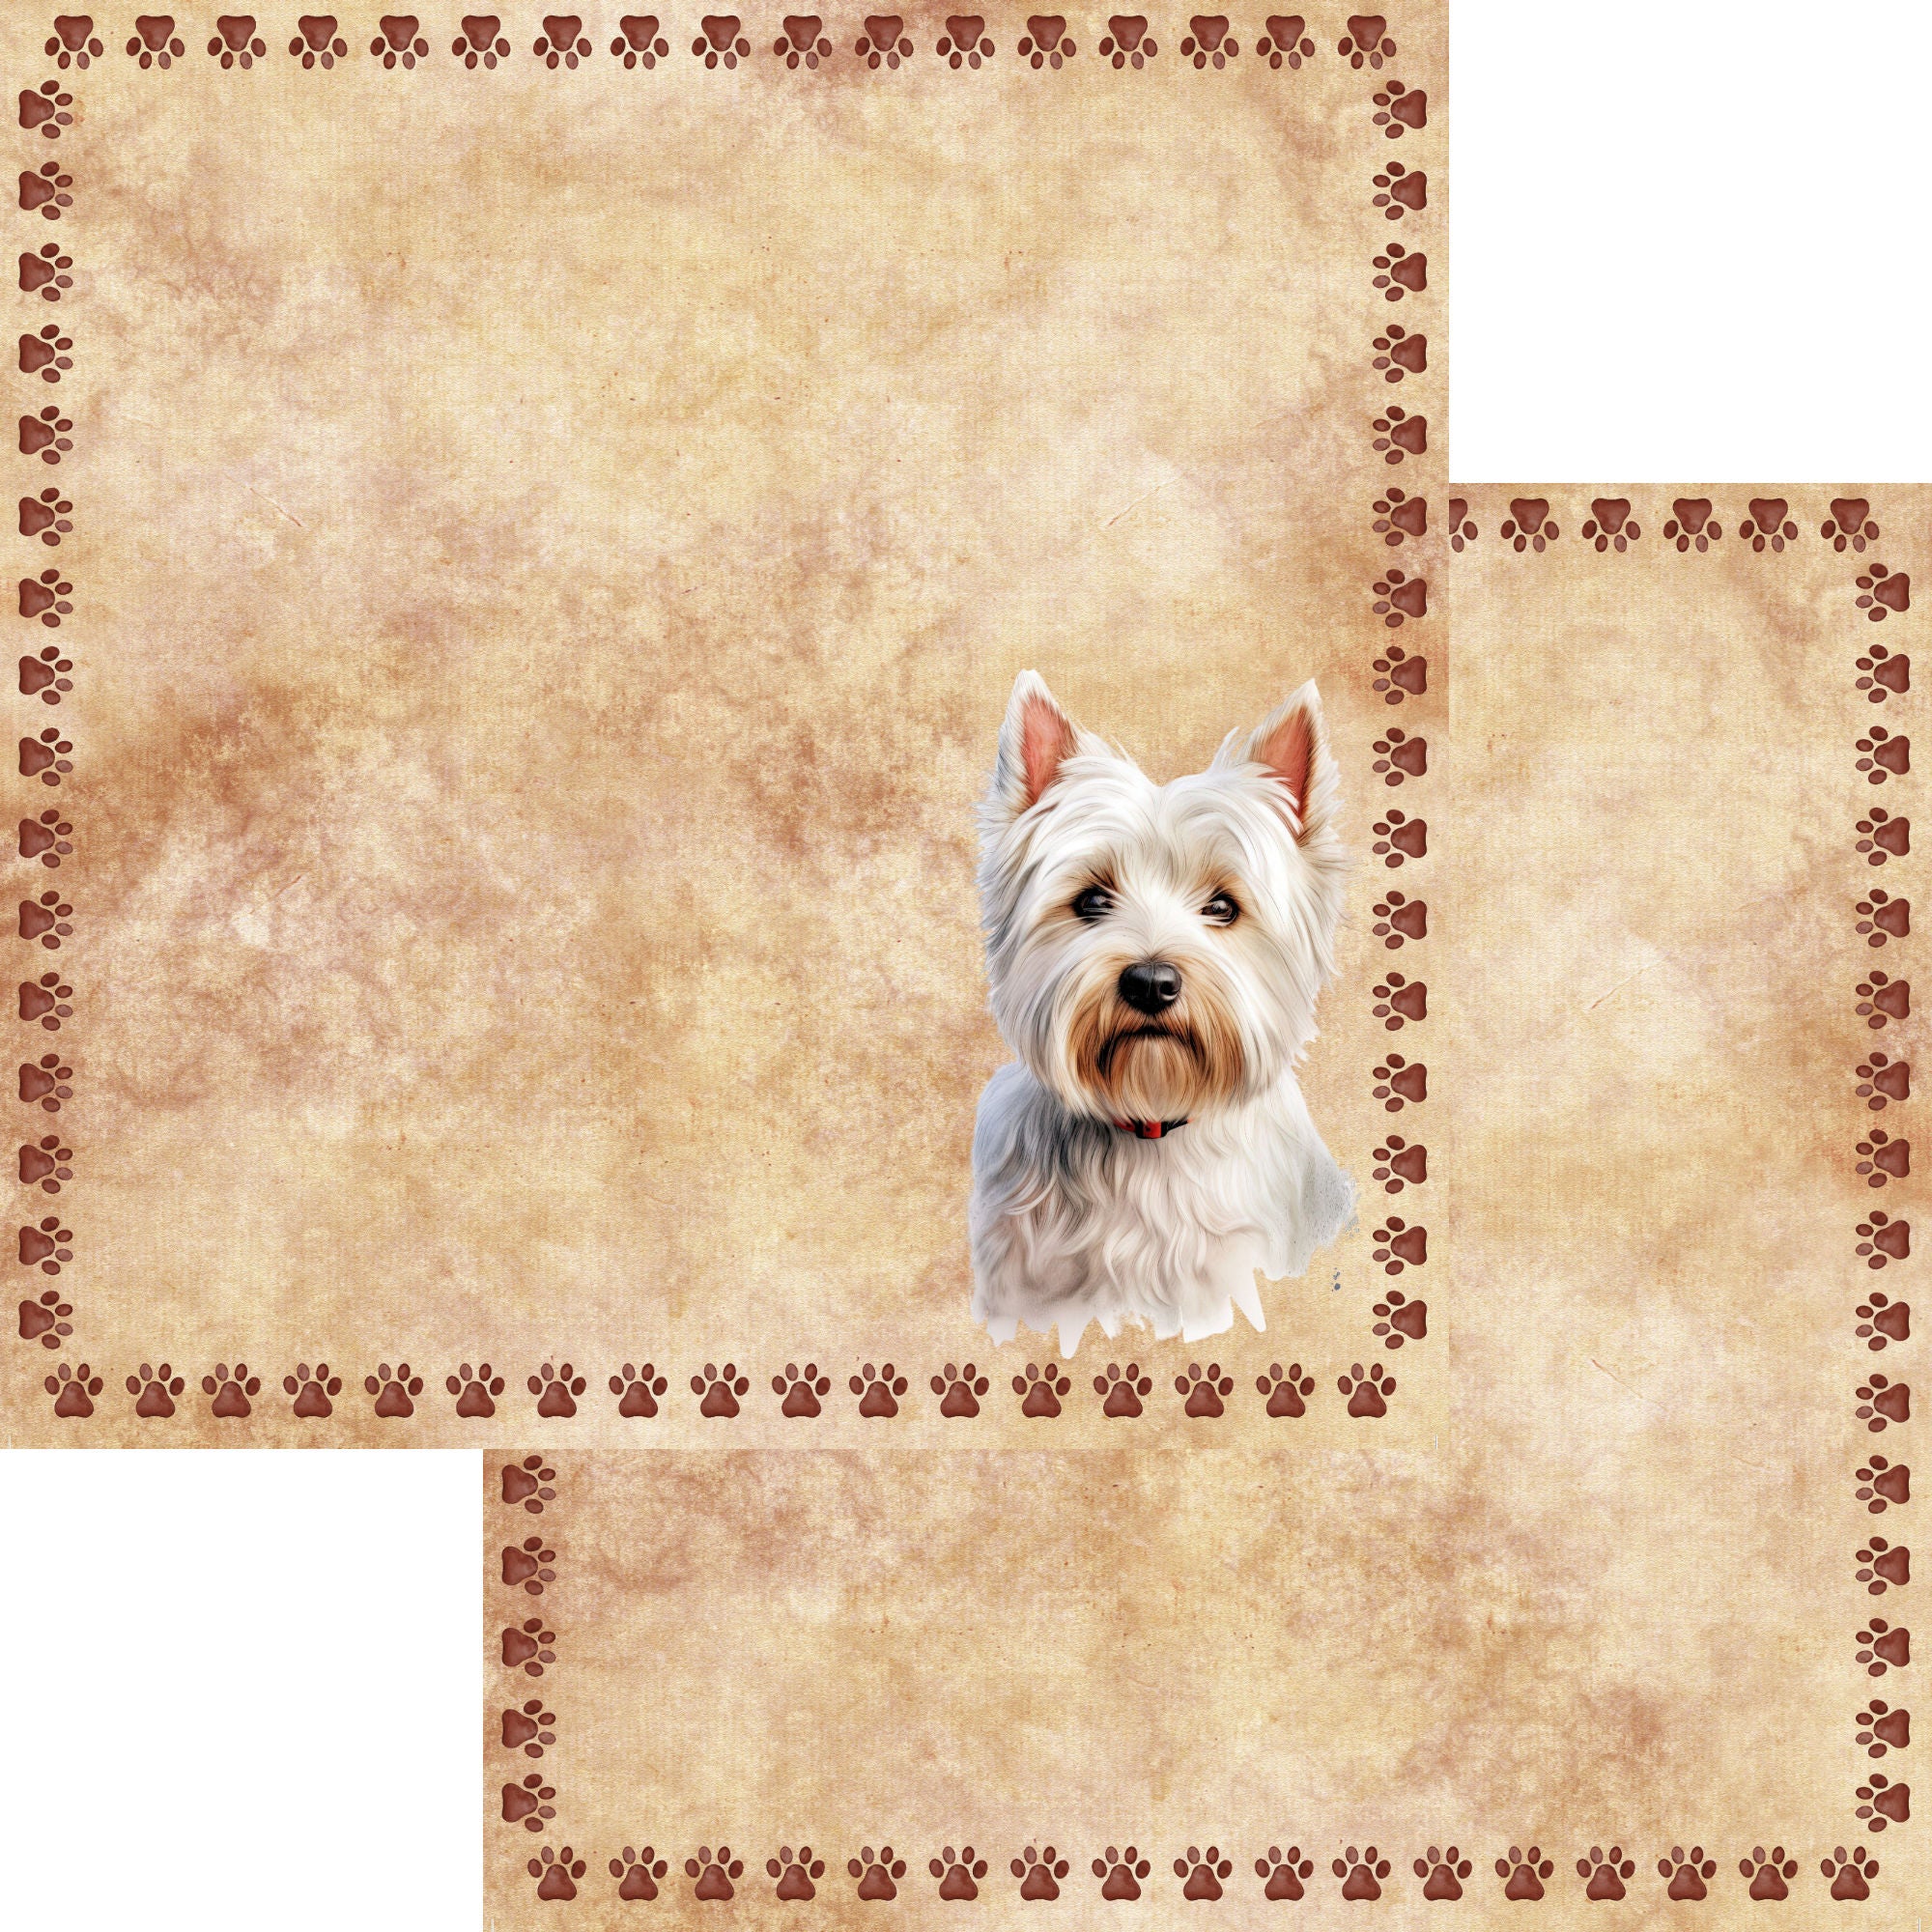 Dog Breeds Collection West Highland White Terrier 12 x 12 Double-Sided Scrapbook Paper by SSC Designs